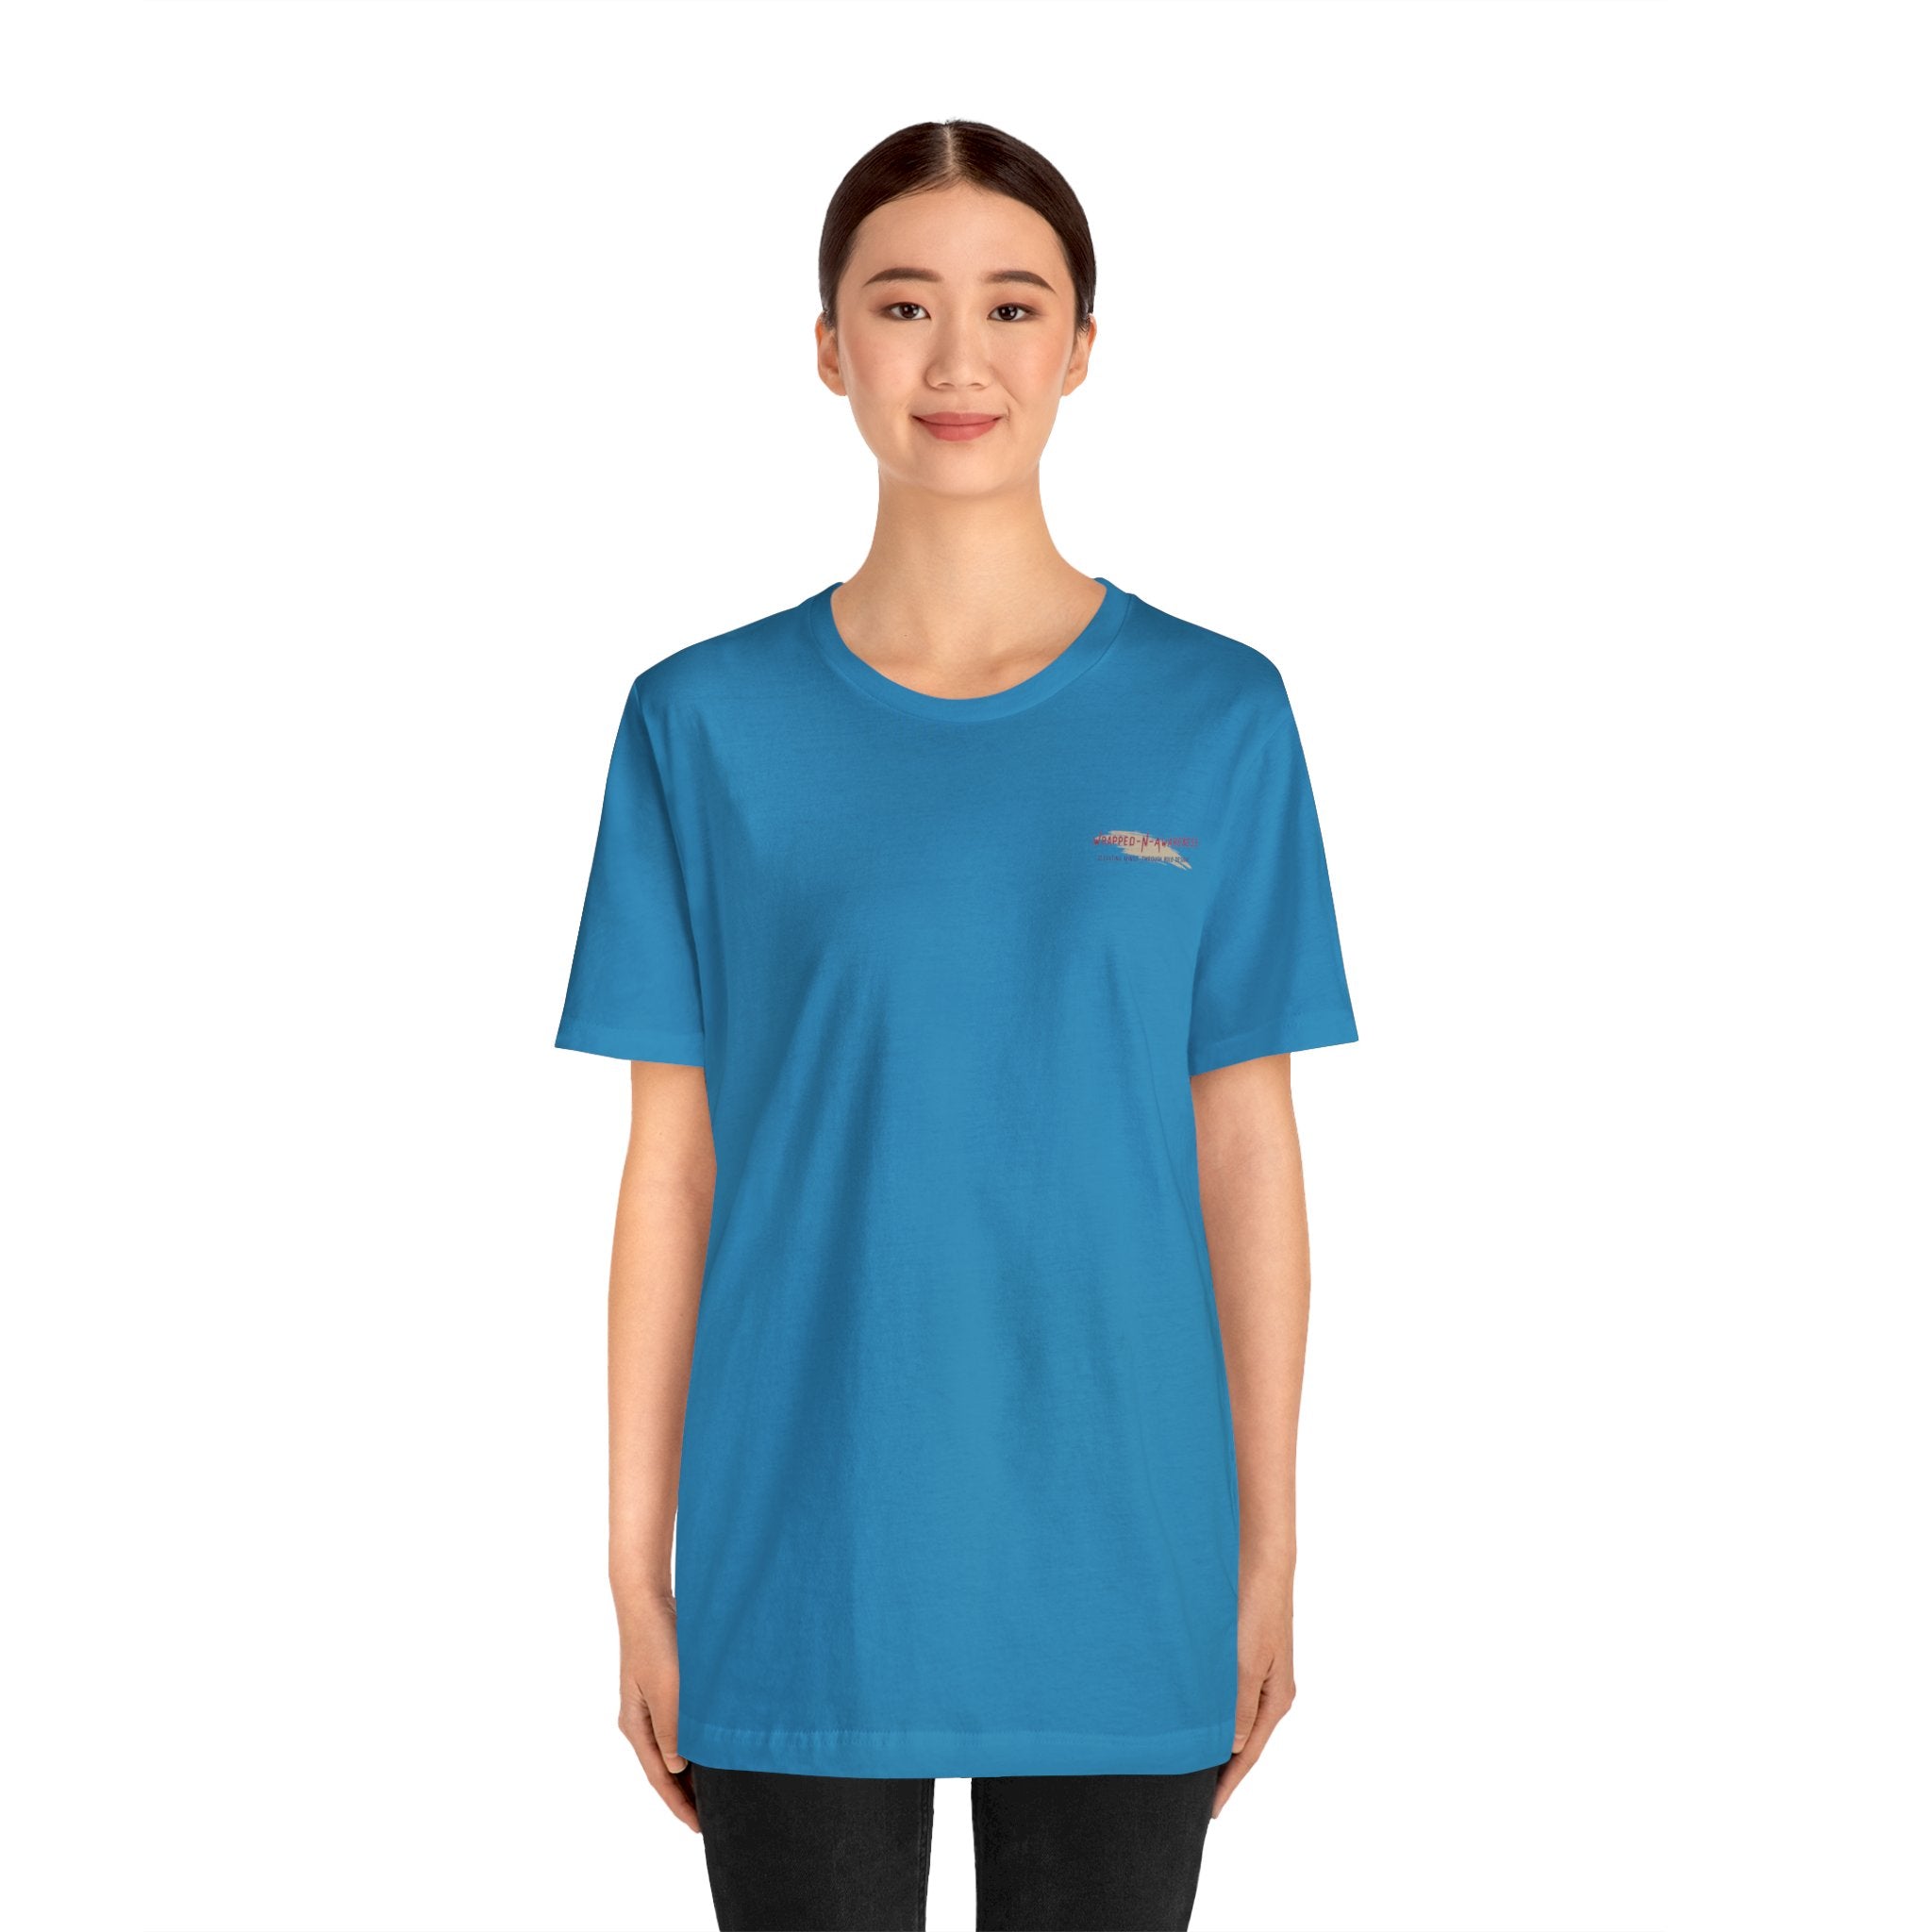 Progress Over Perfection Tee - Bella+Canvas 3001 Yellow Airlume Cotton Bella+Canvas 3001 Crew Neckline Jersey Short Sleeve Lightweight Fabric Mental Health Support Retail Fit Tear-away Label Tee Unisex Tee T-Shirt 628112992608115915_2048 Printify